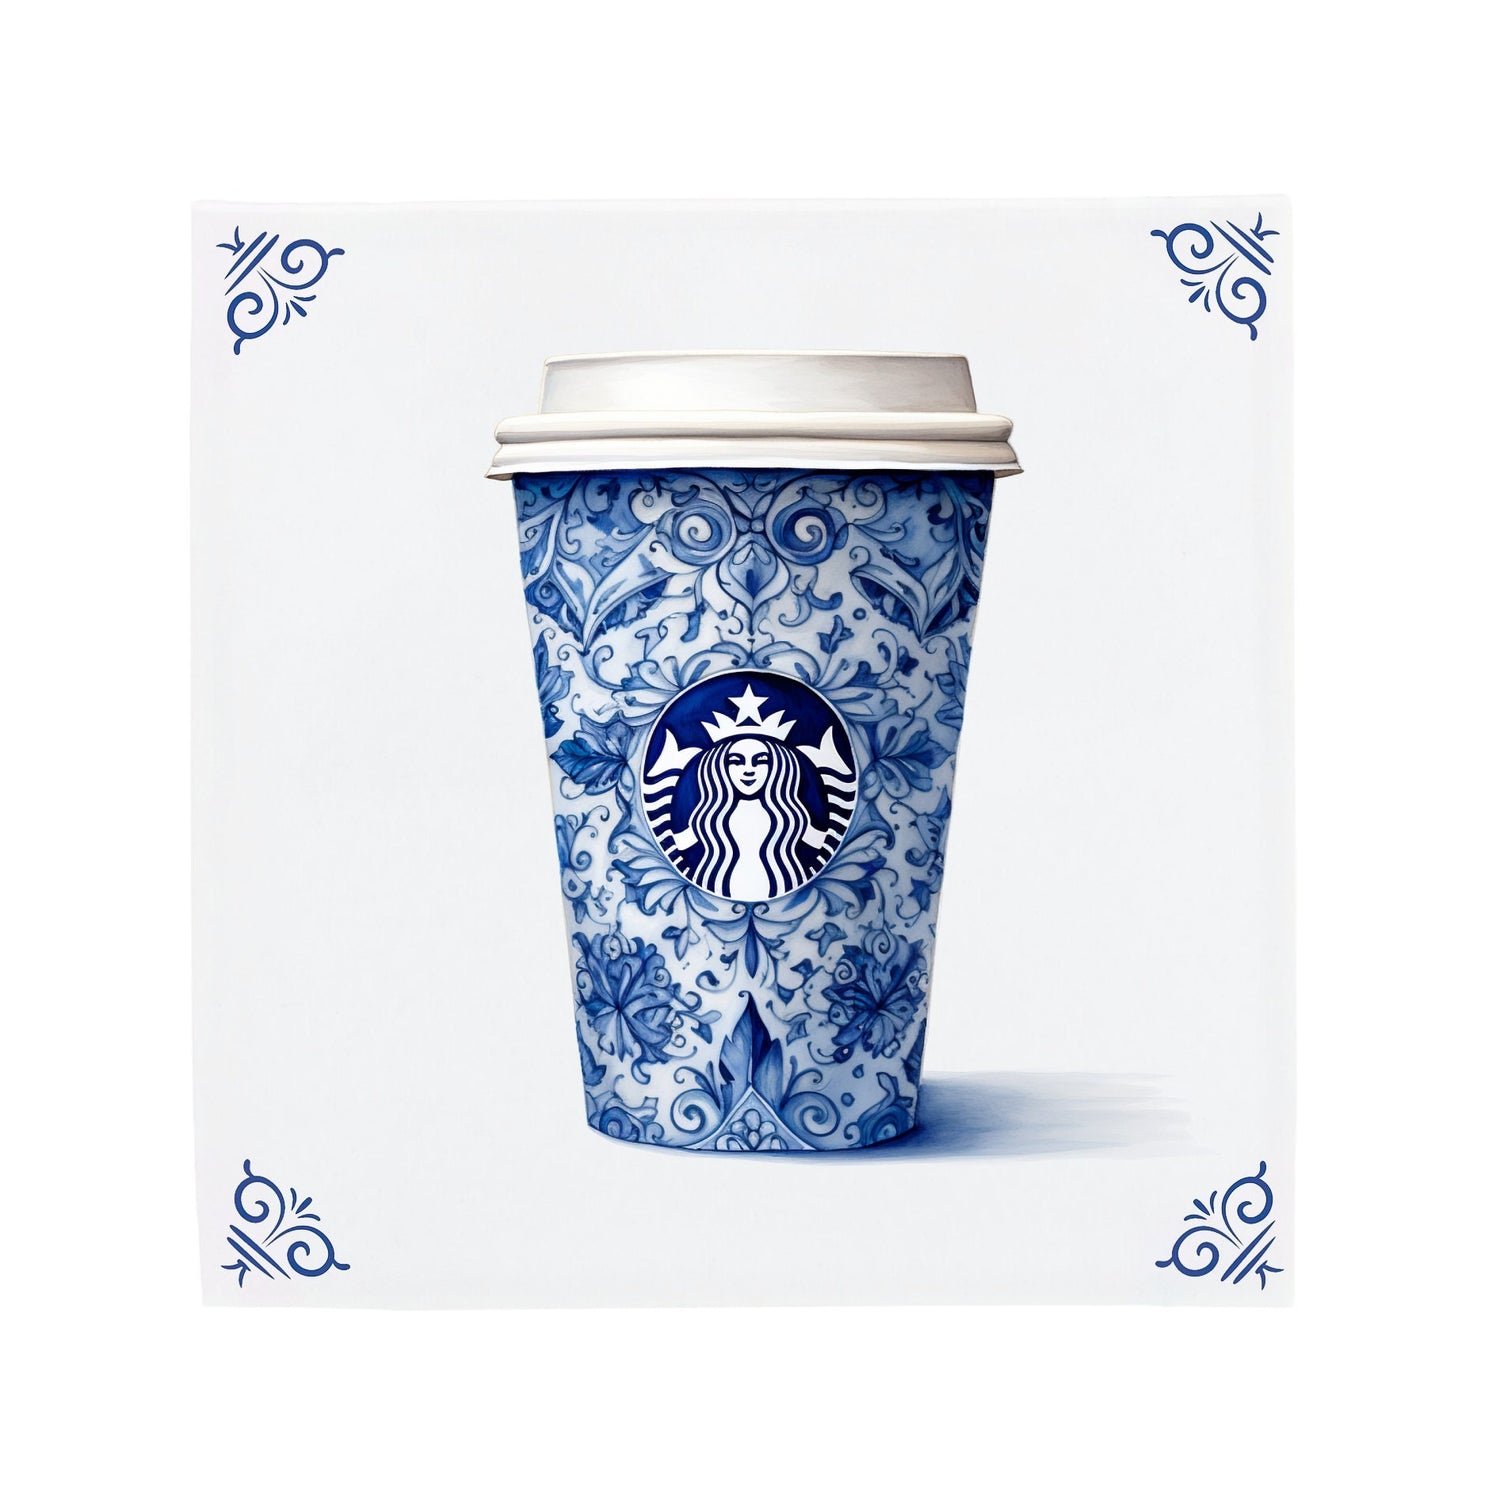 Decorated Delft Blue Starbucks Cup